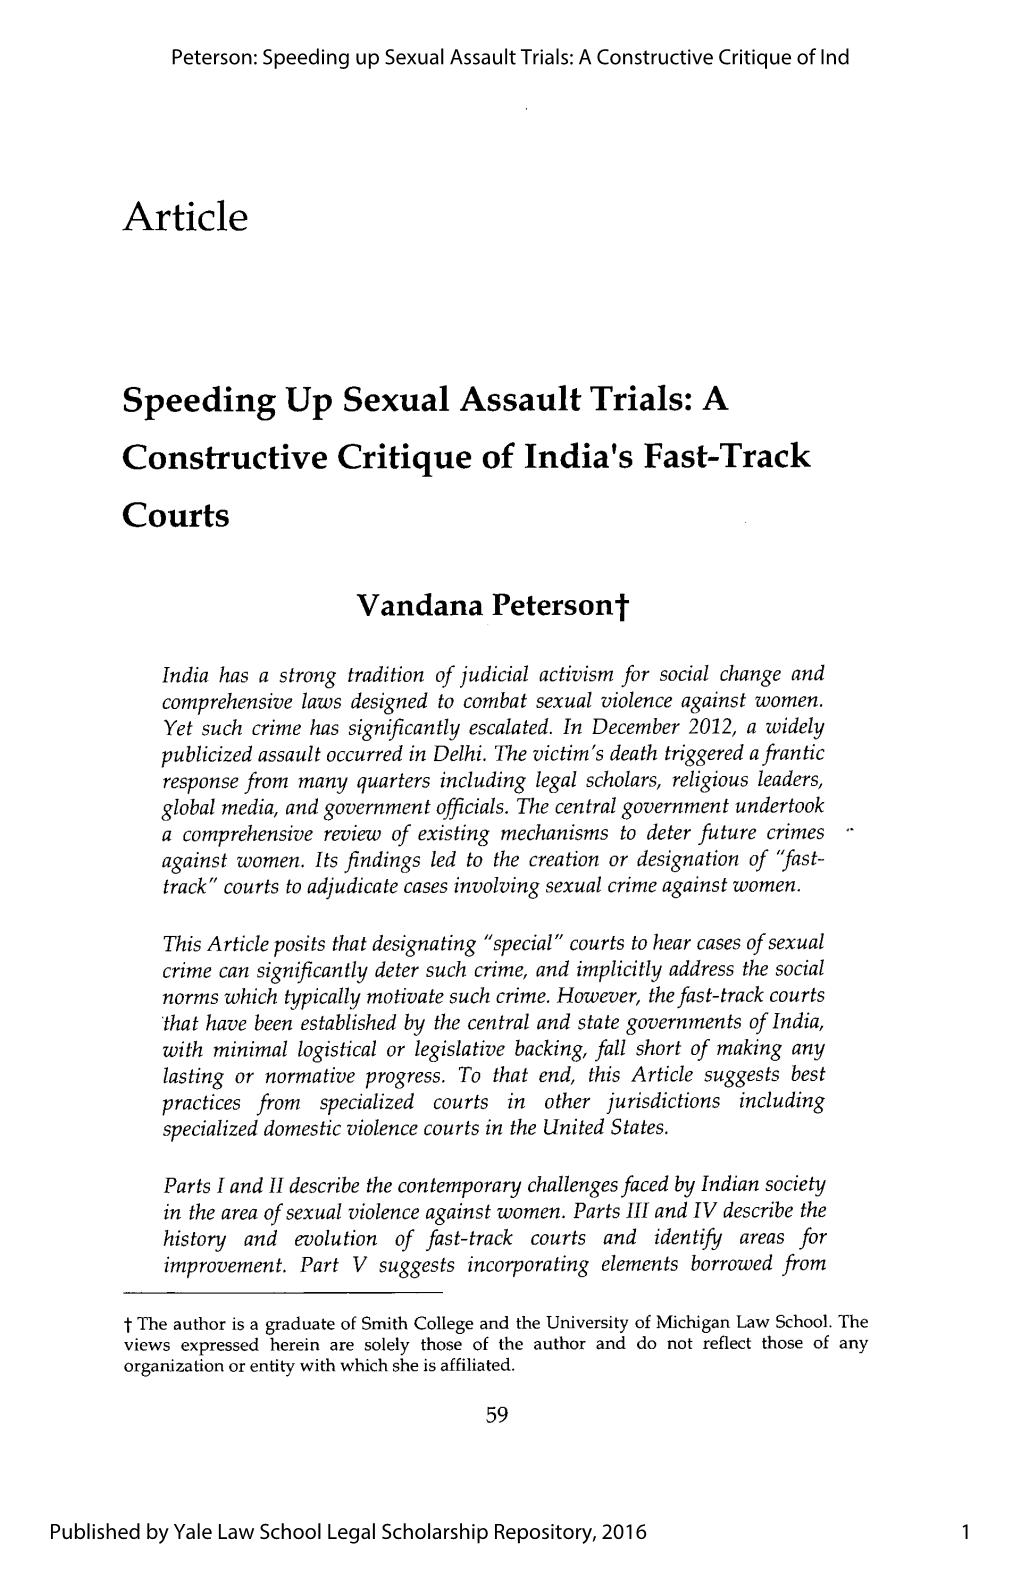 A Constructive Critique of India's Fast-Track Courts